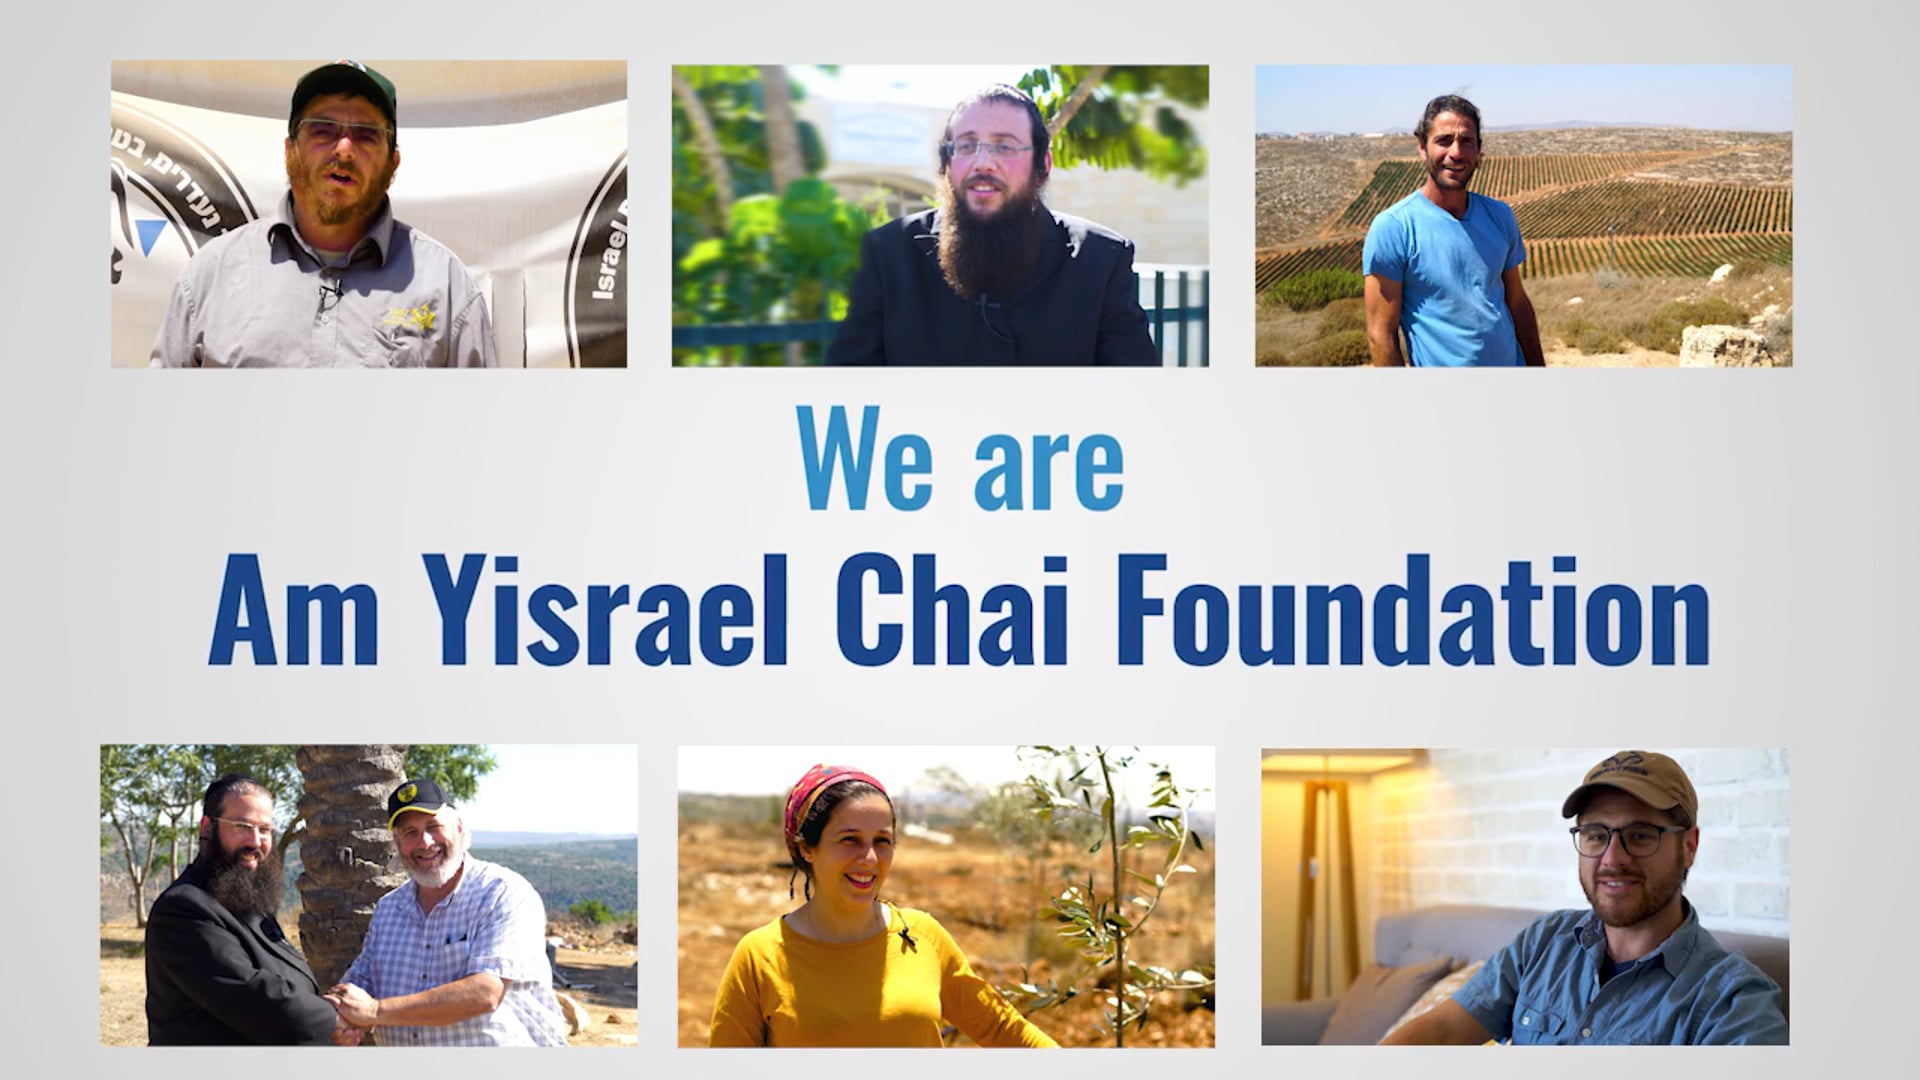 We Are Am Yisrael Chai Fund